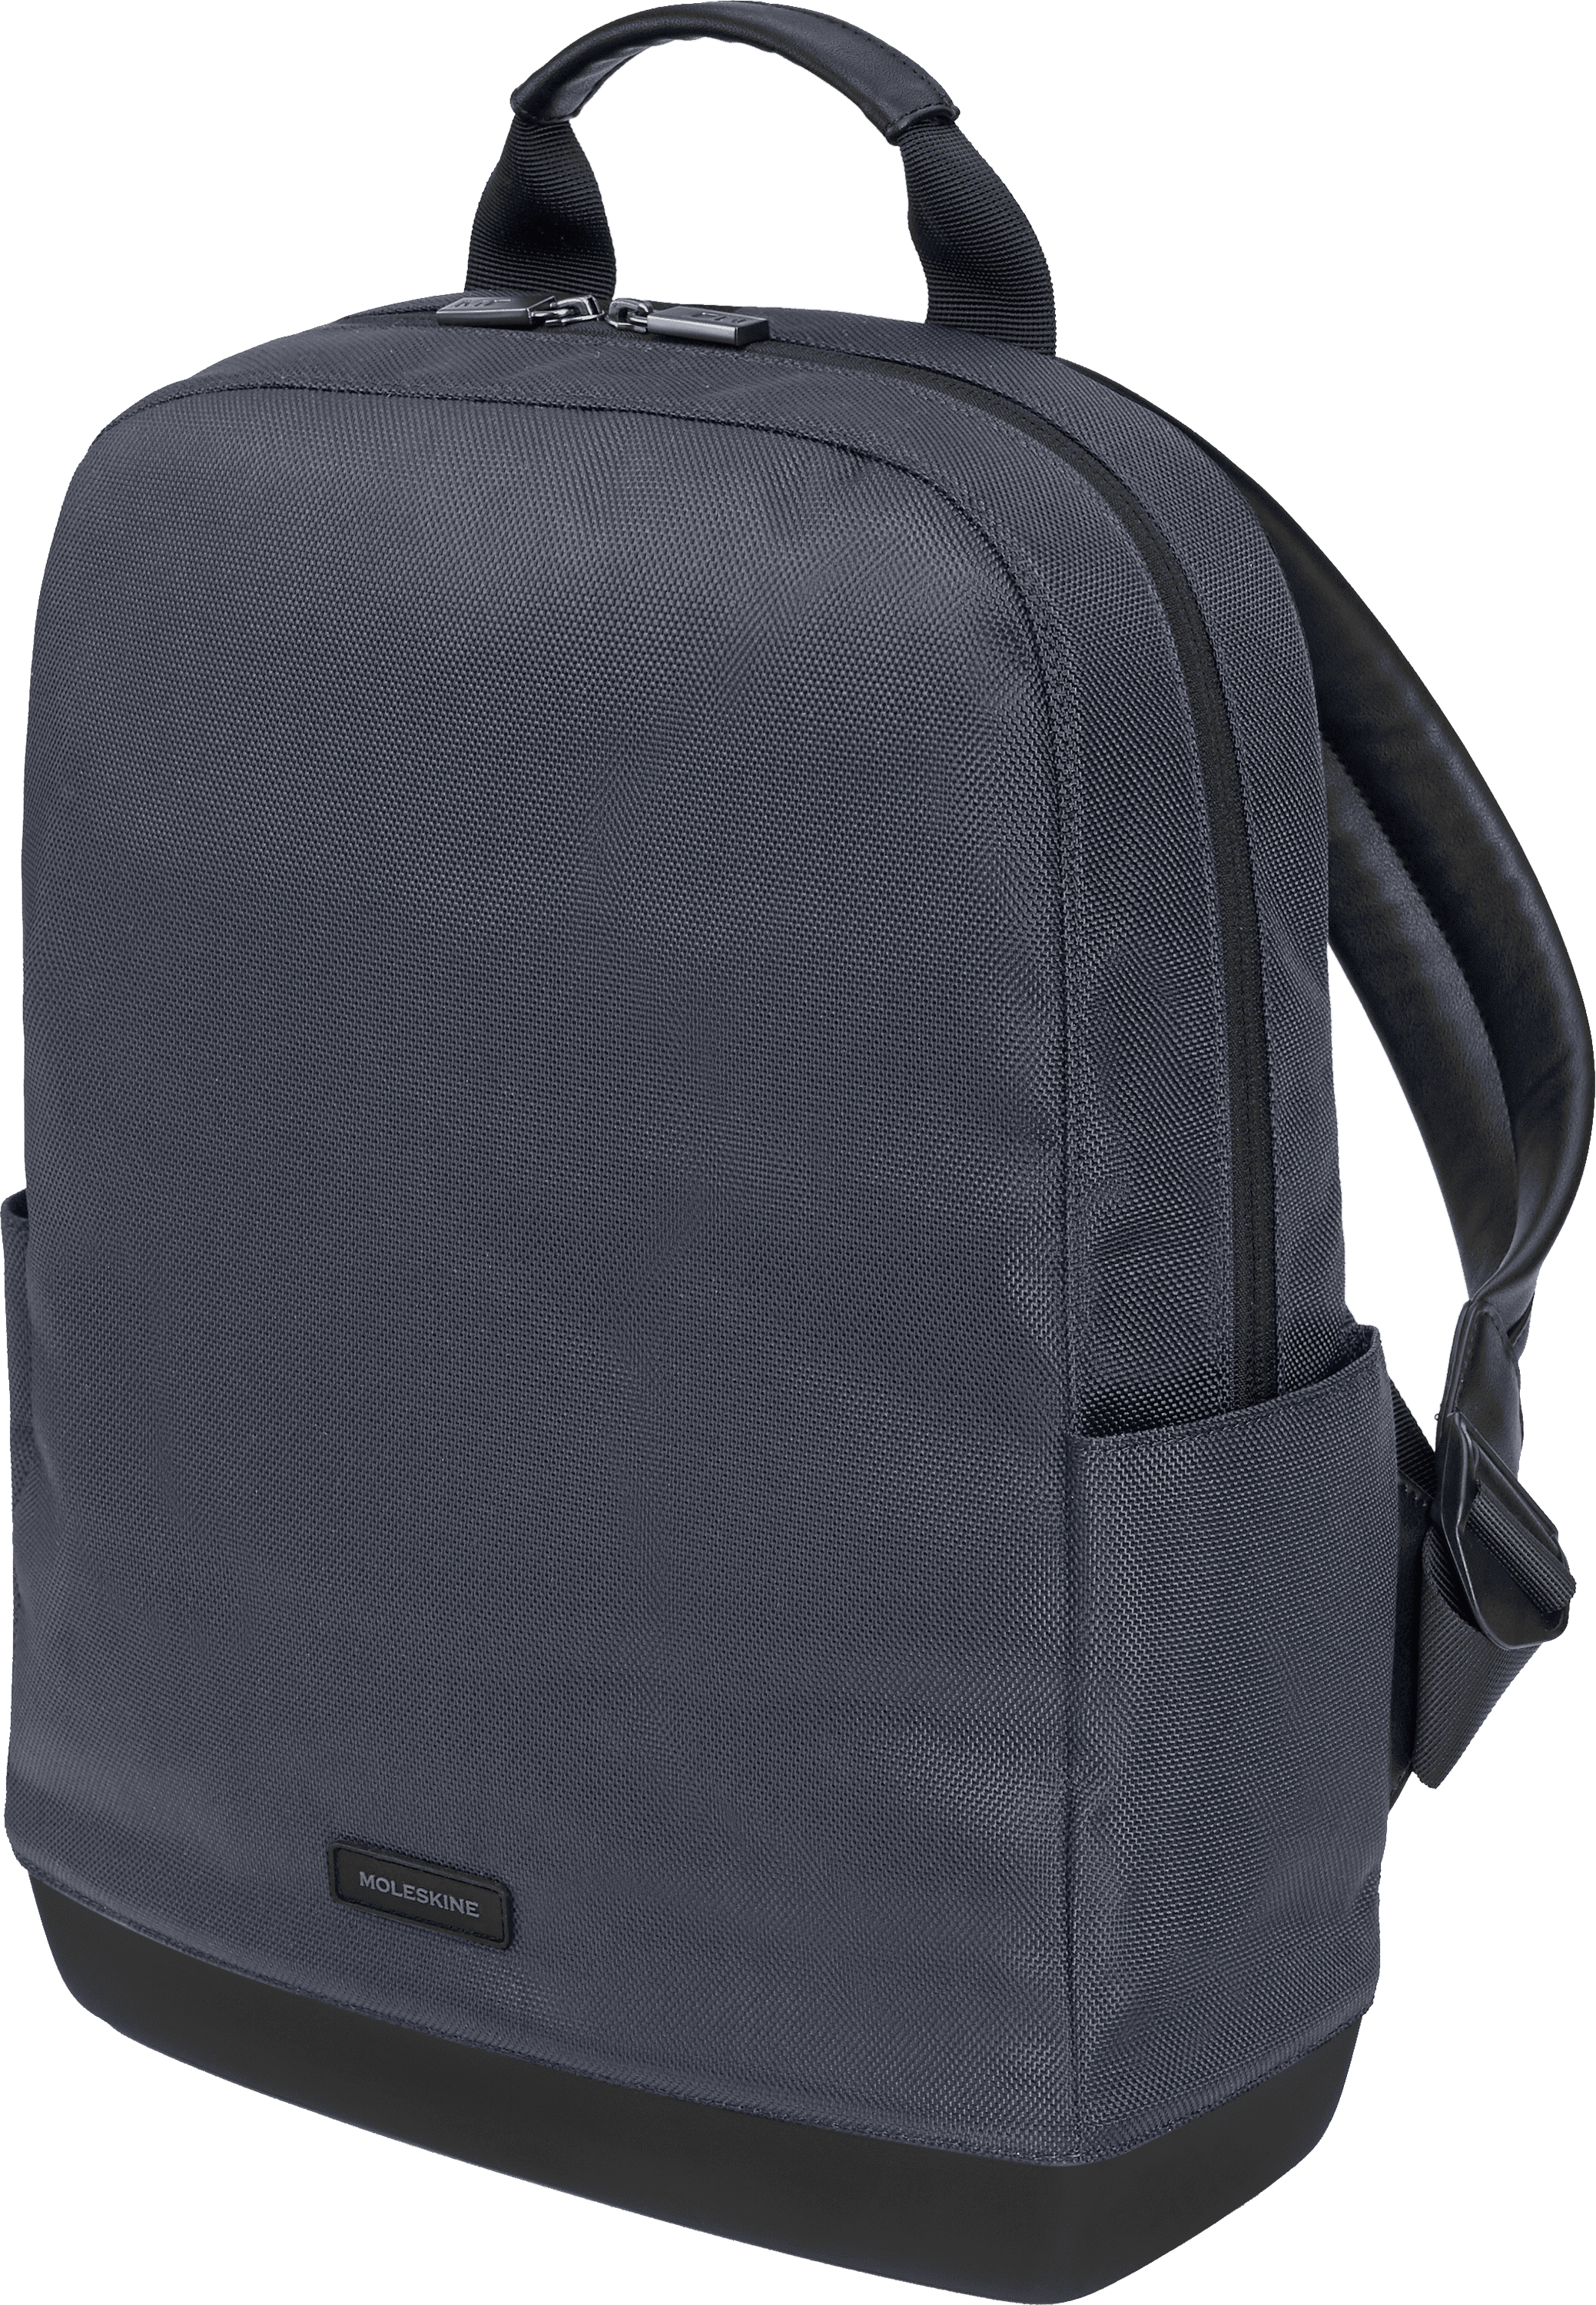 Amazon.com: Moleskine Backpack Shoulder Bag For PC Device Horizontal Bag PC  13 Inches and Tablet Waterproof Material Water Resistant, Grey : Moleskine:  Electronics